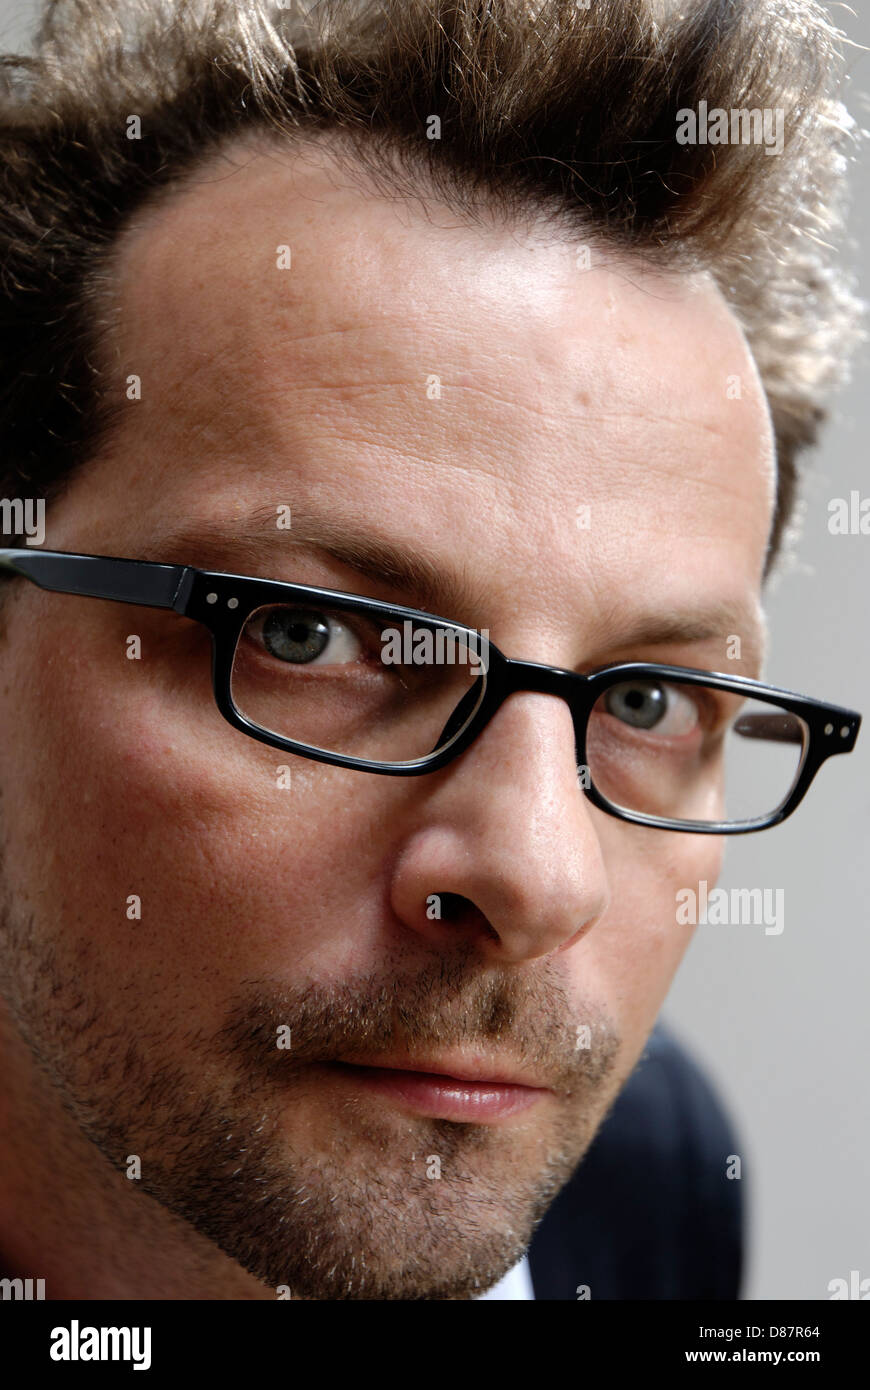 Man, 40, with glasses and unshaved Stock Photo